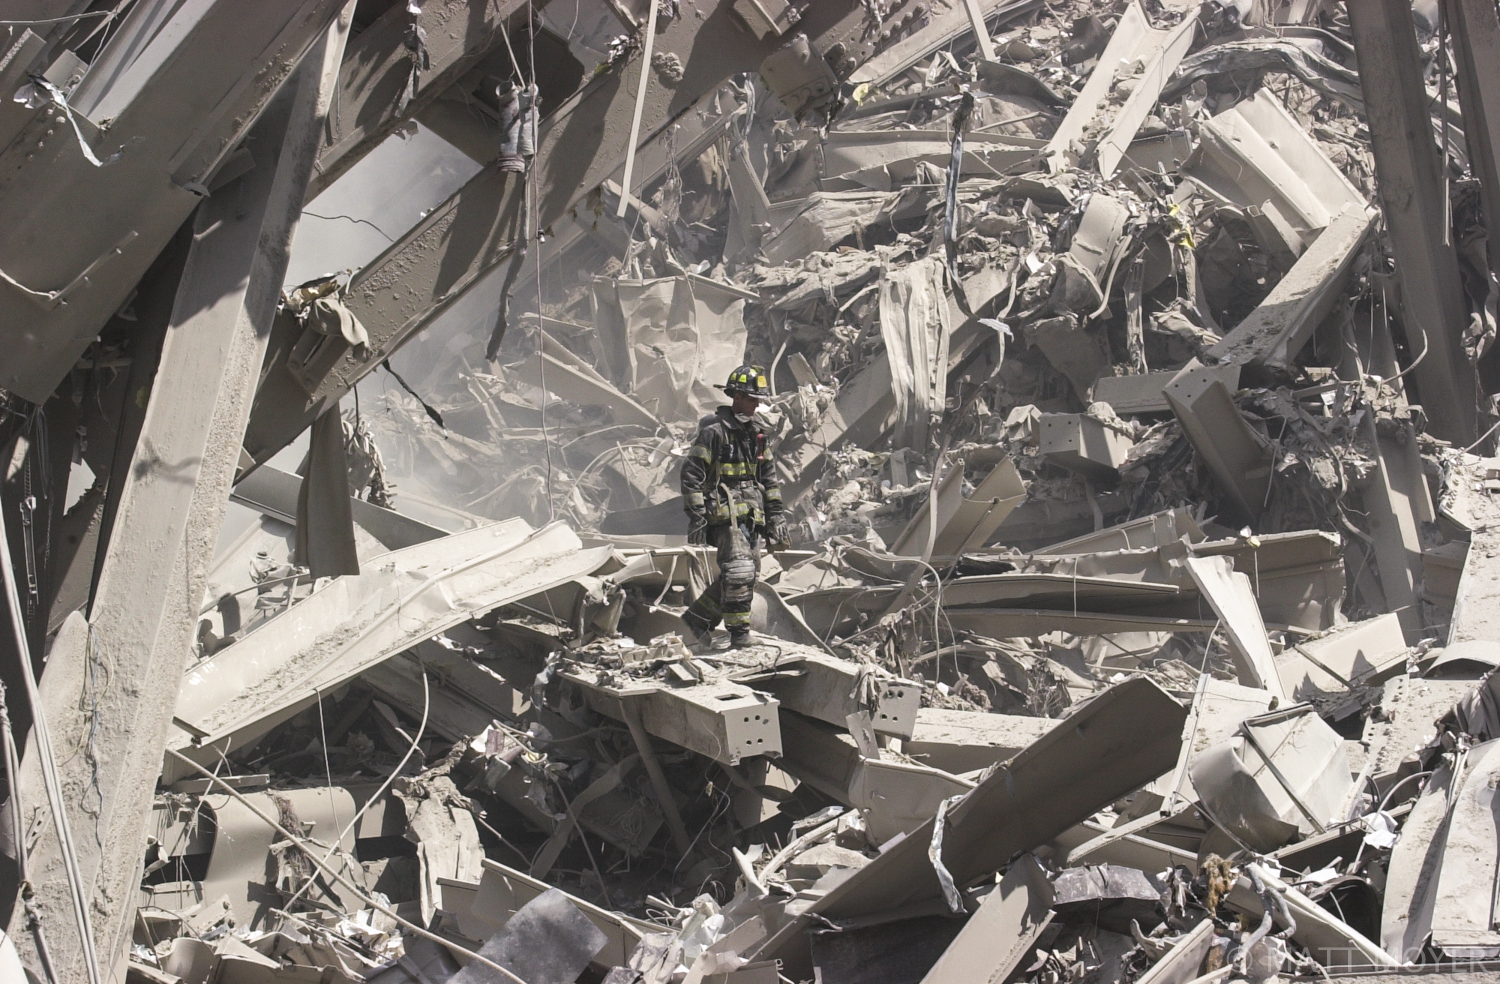  Firefighters search for survivors after the collapse of the World Trade Center on Sept. 11, 2001. 